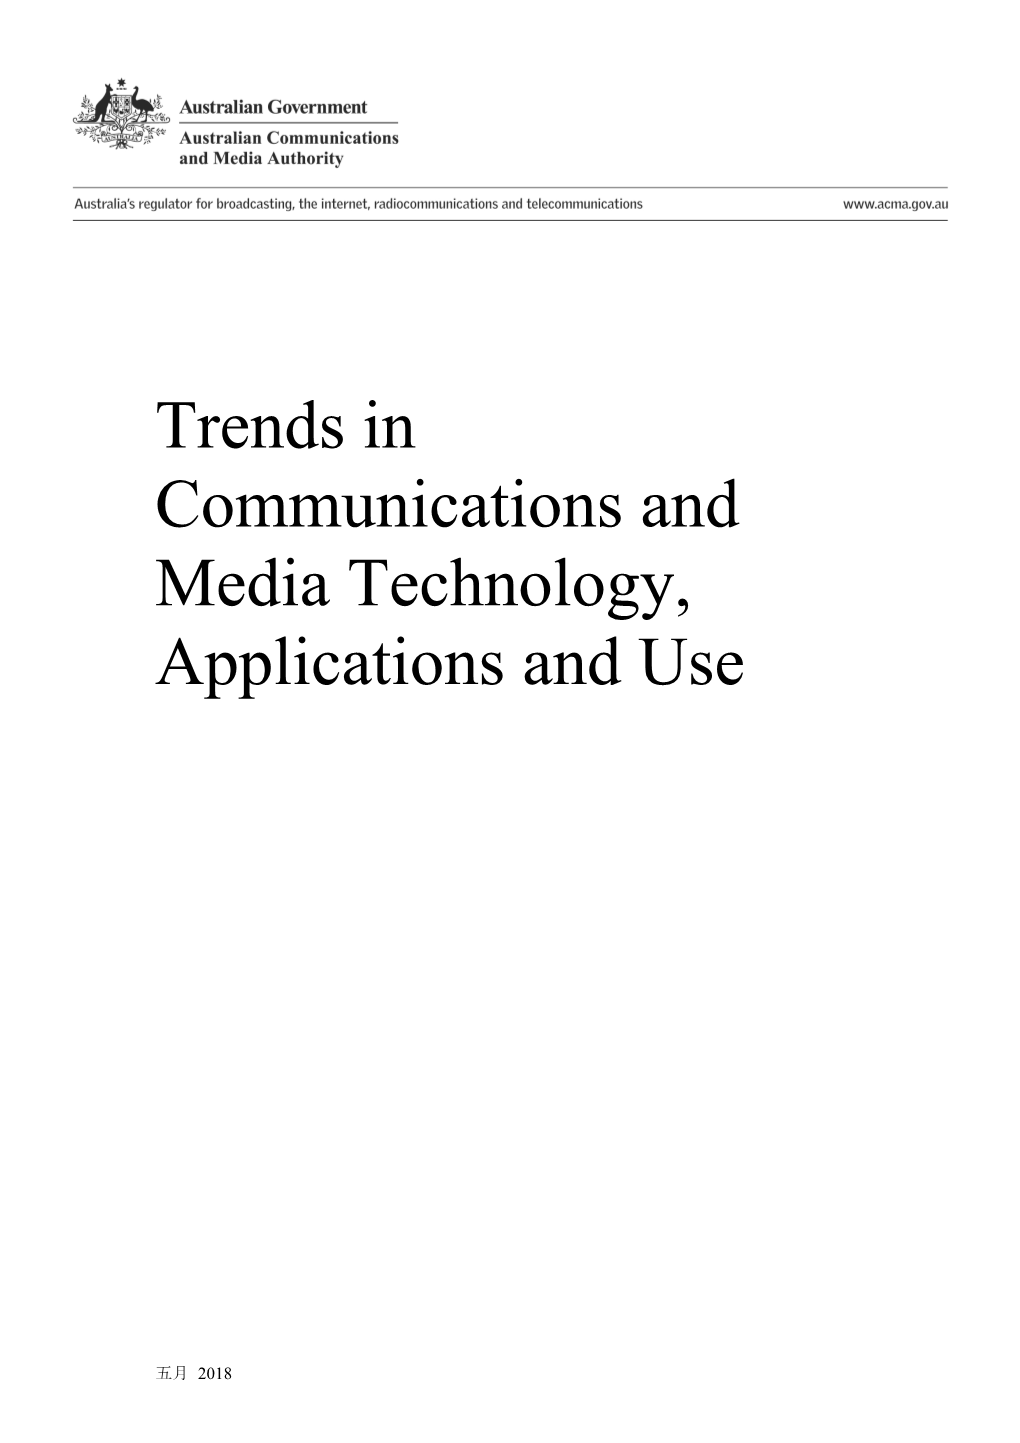 Trends in Communications and Media Technology, Applications and Use